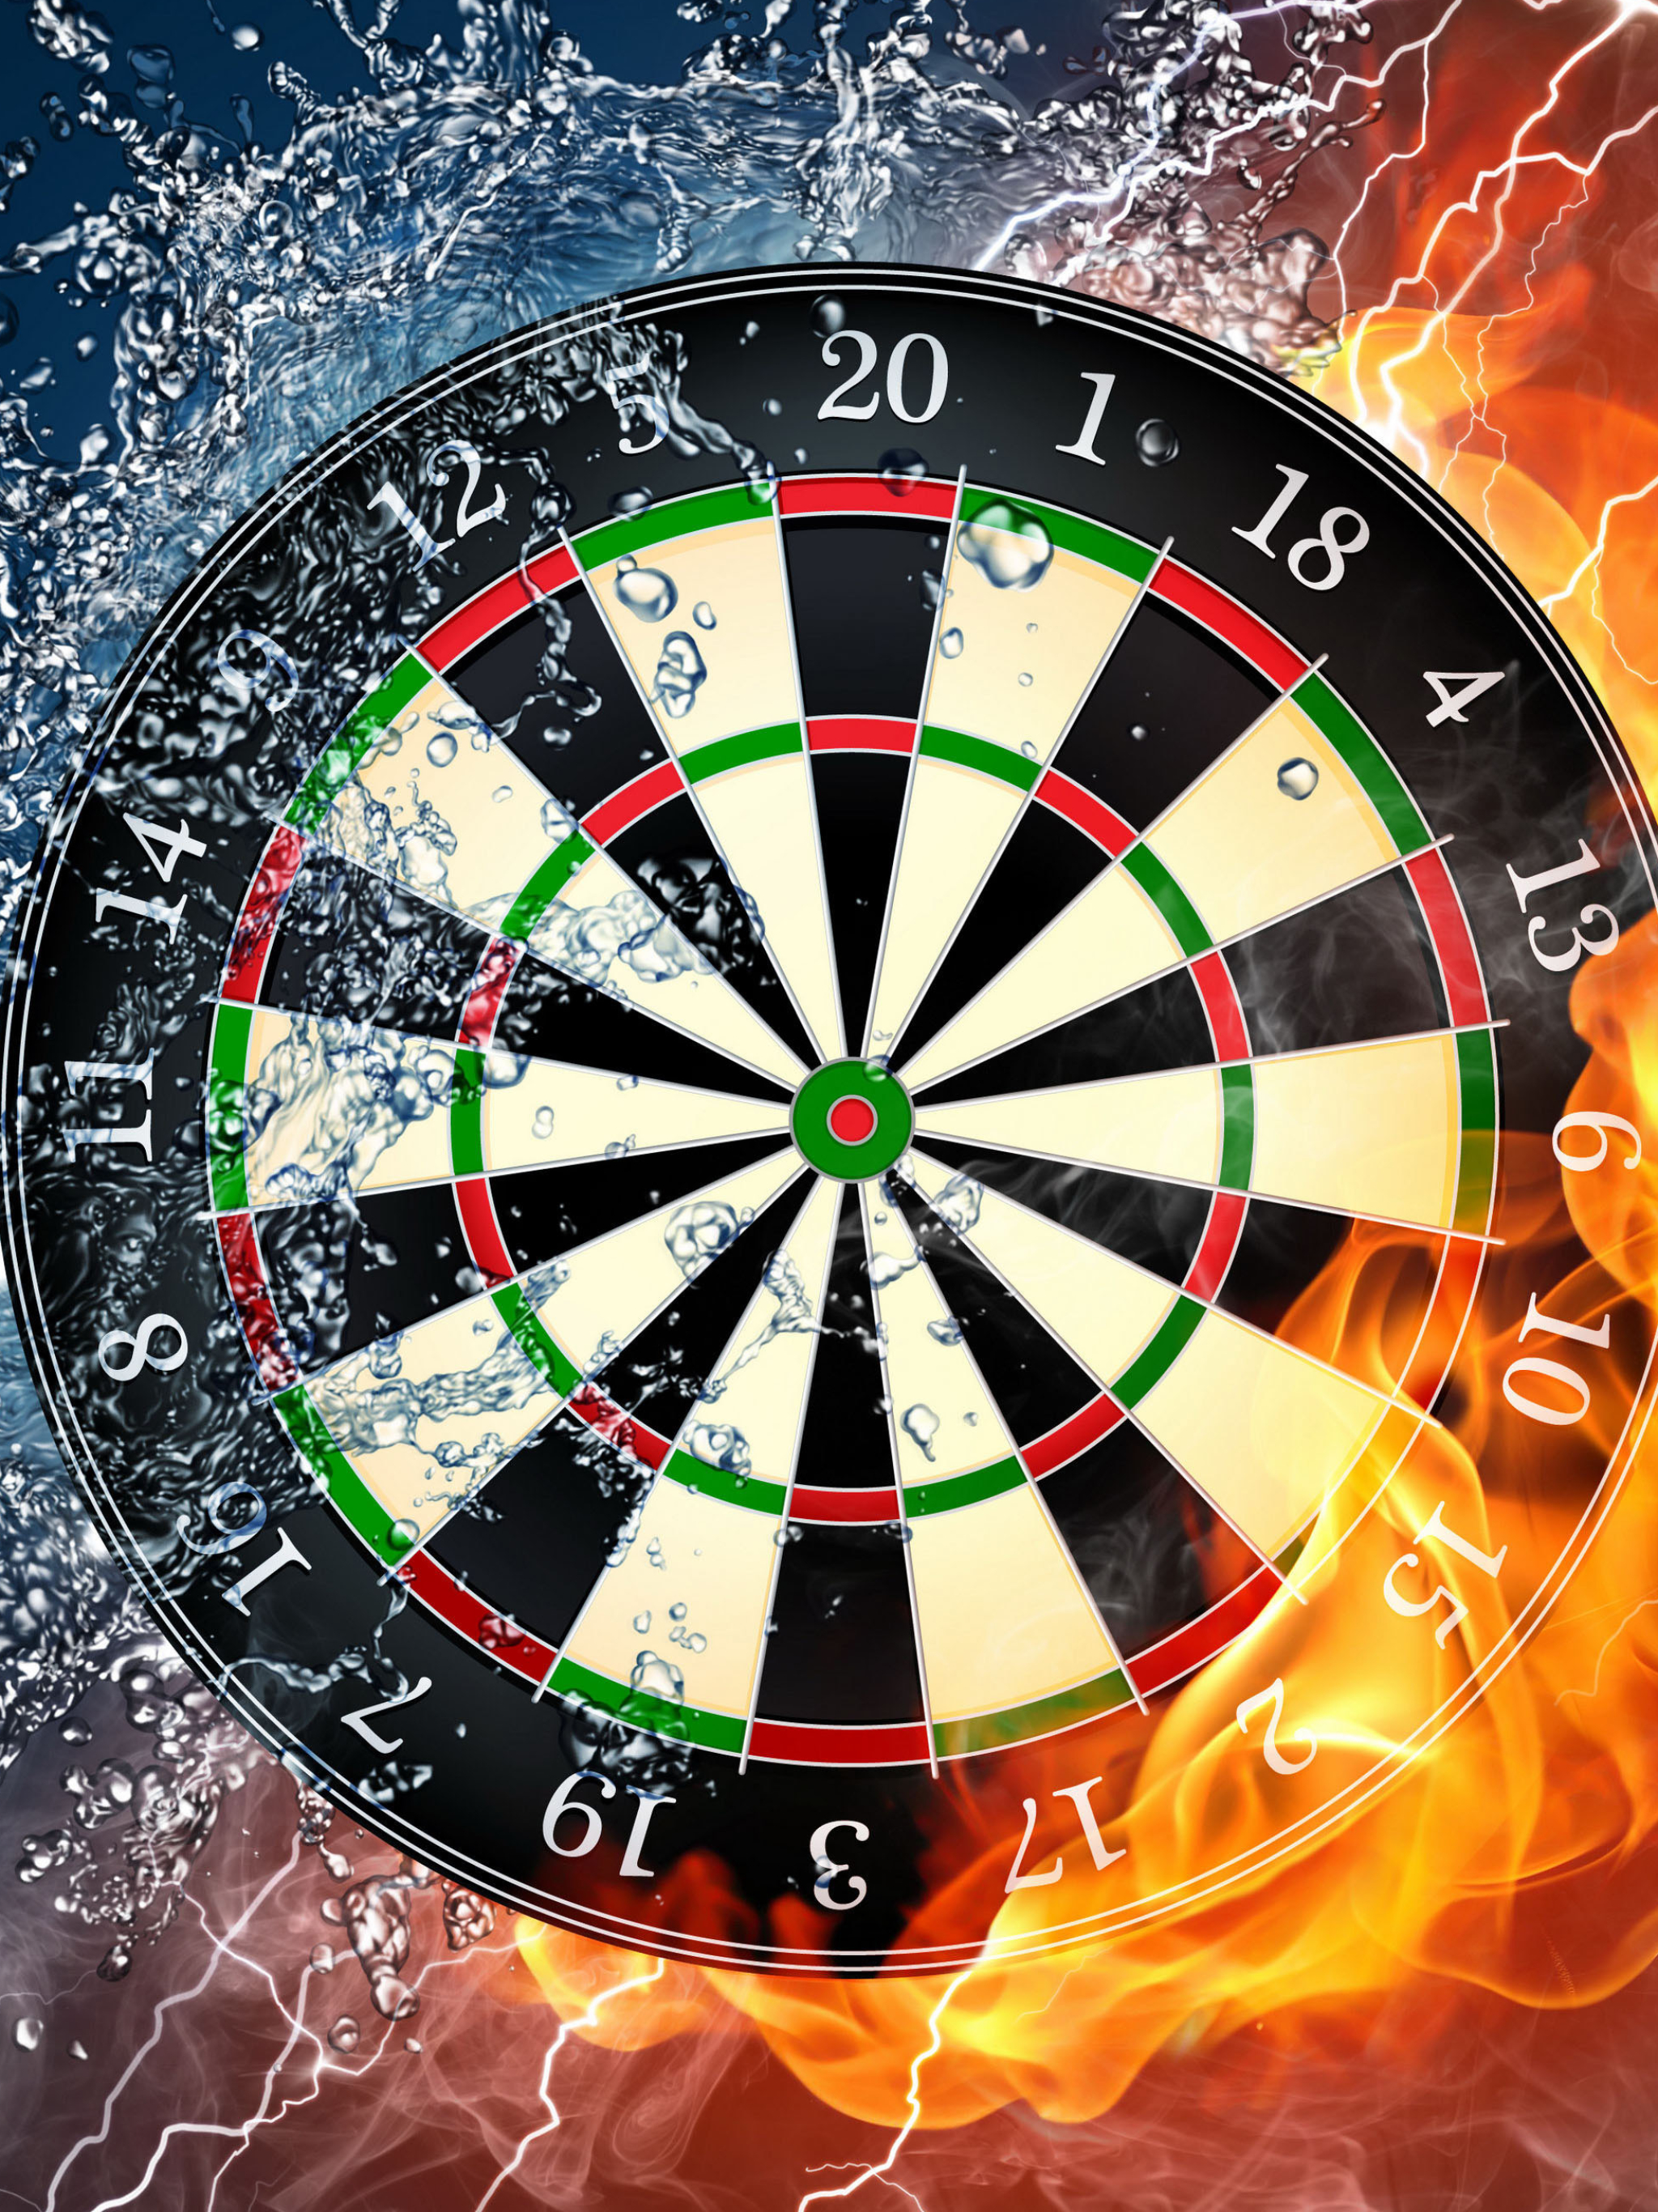 game, darts, dart board, water, elemental, flame cell phone wallpapers